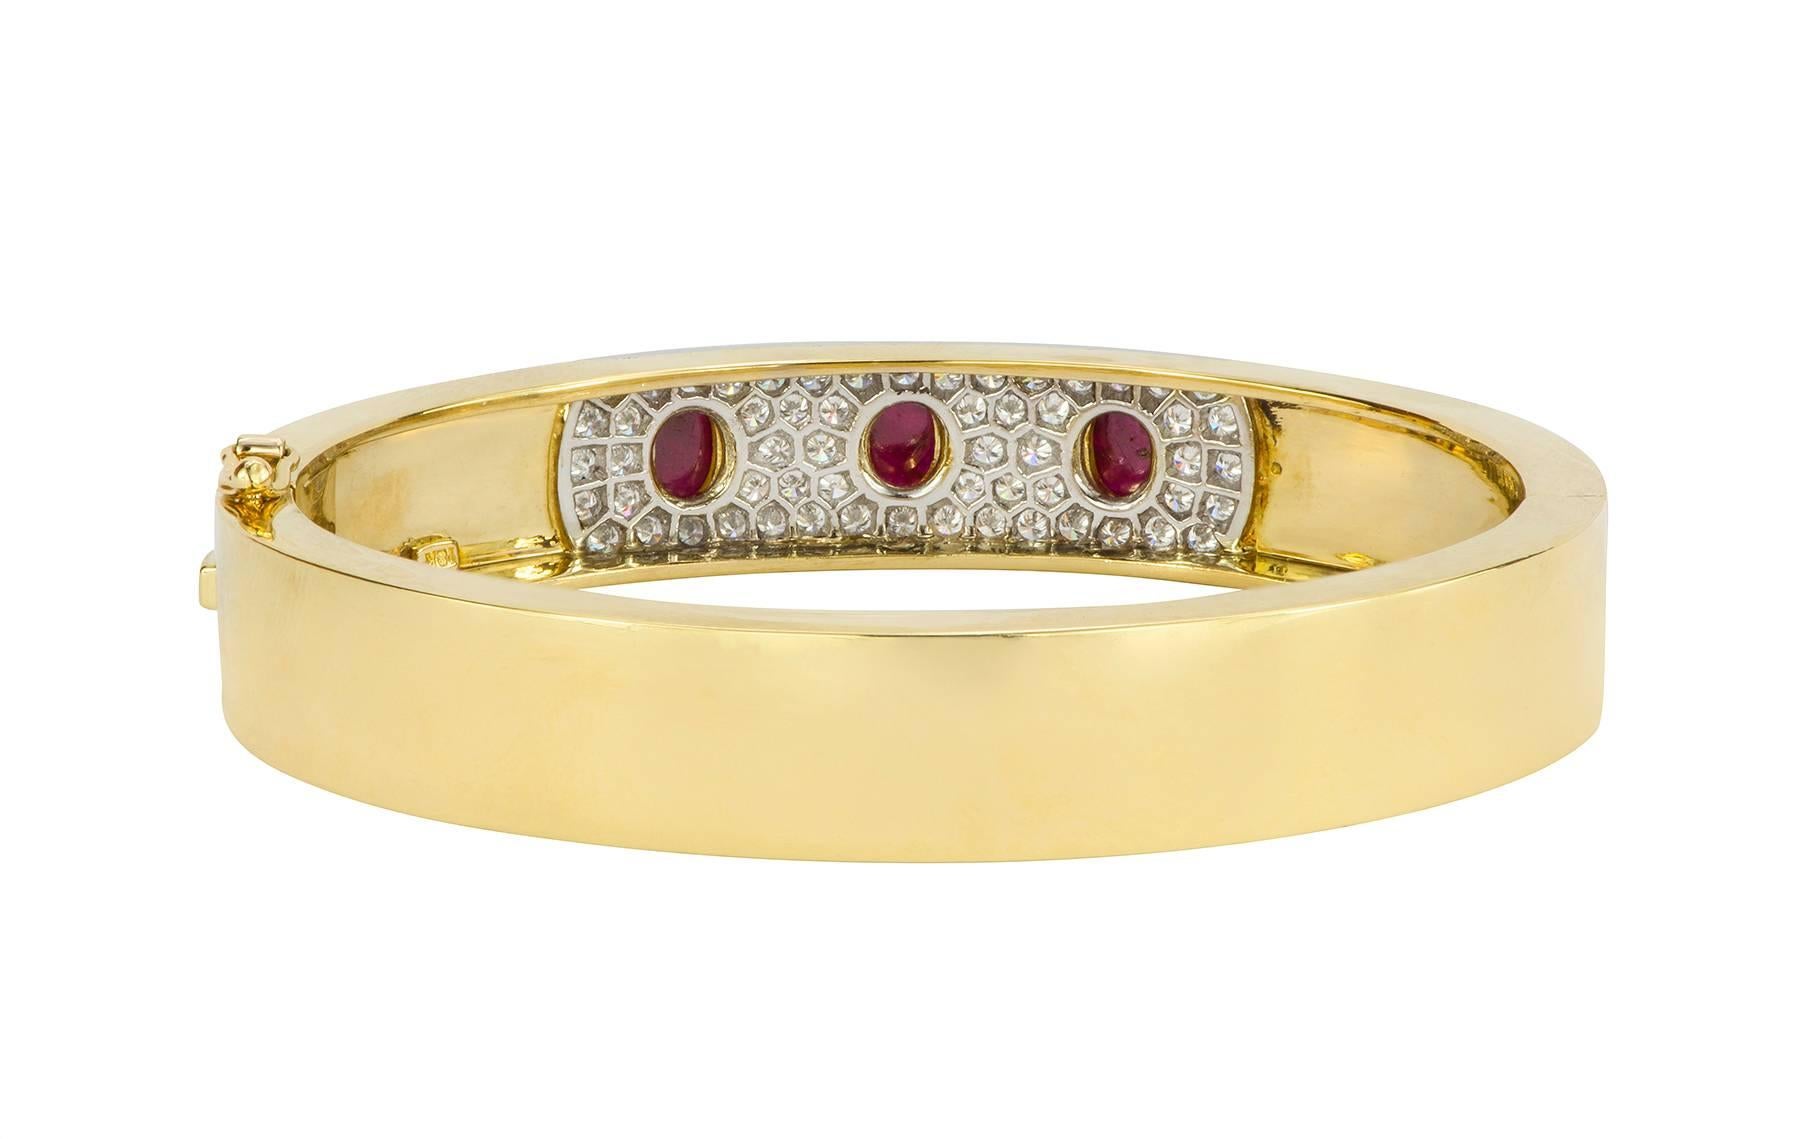 A hinged bangle bracelet made up of three cabochon rubies bezel set in a pave diamond station of platinum in the center of the 18k yellow gold bangle.  The three rubies have an estimated total weight of 2.30cts, with 0.82cts in diamonds.  The